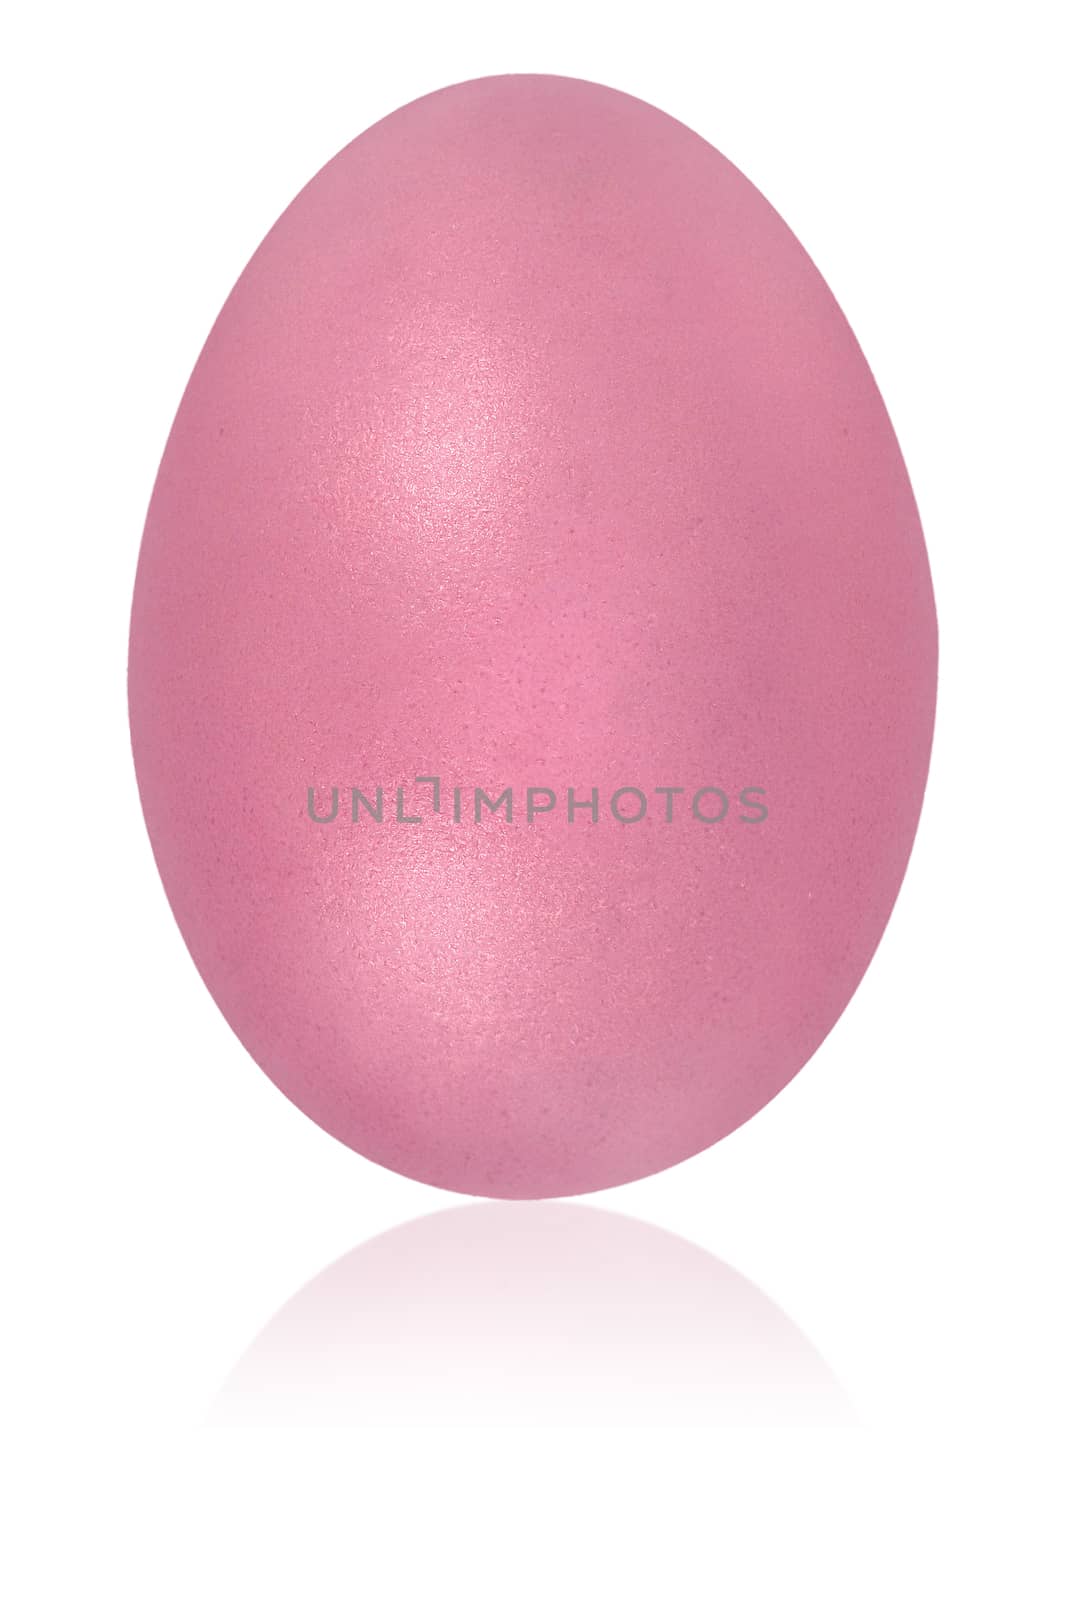  pale pink  egg by fadeinphotography